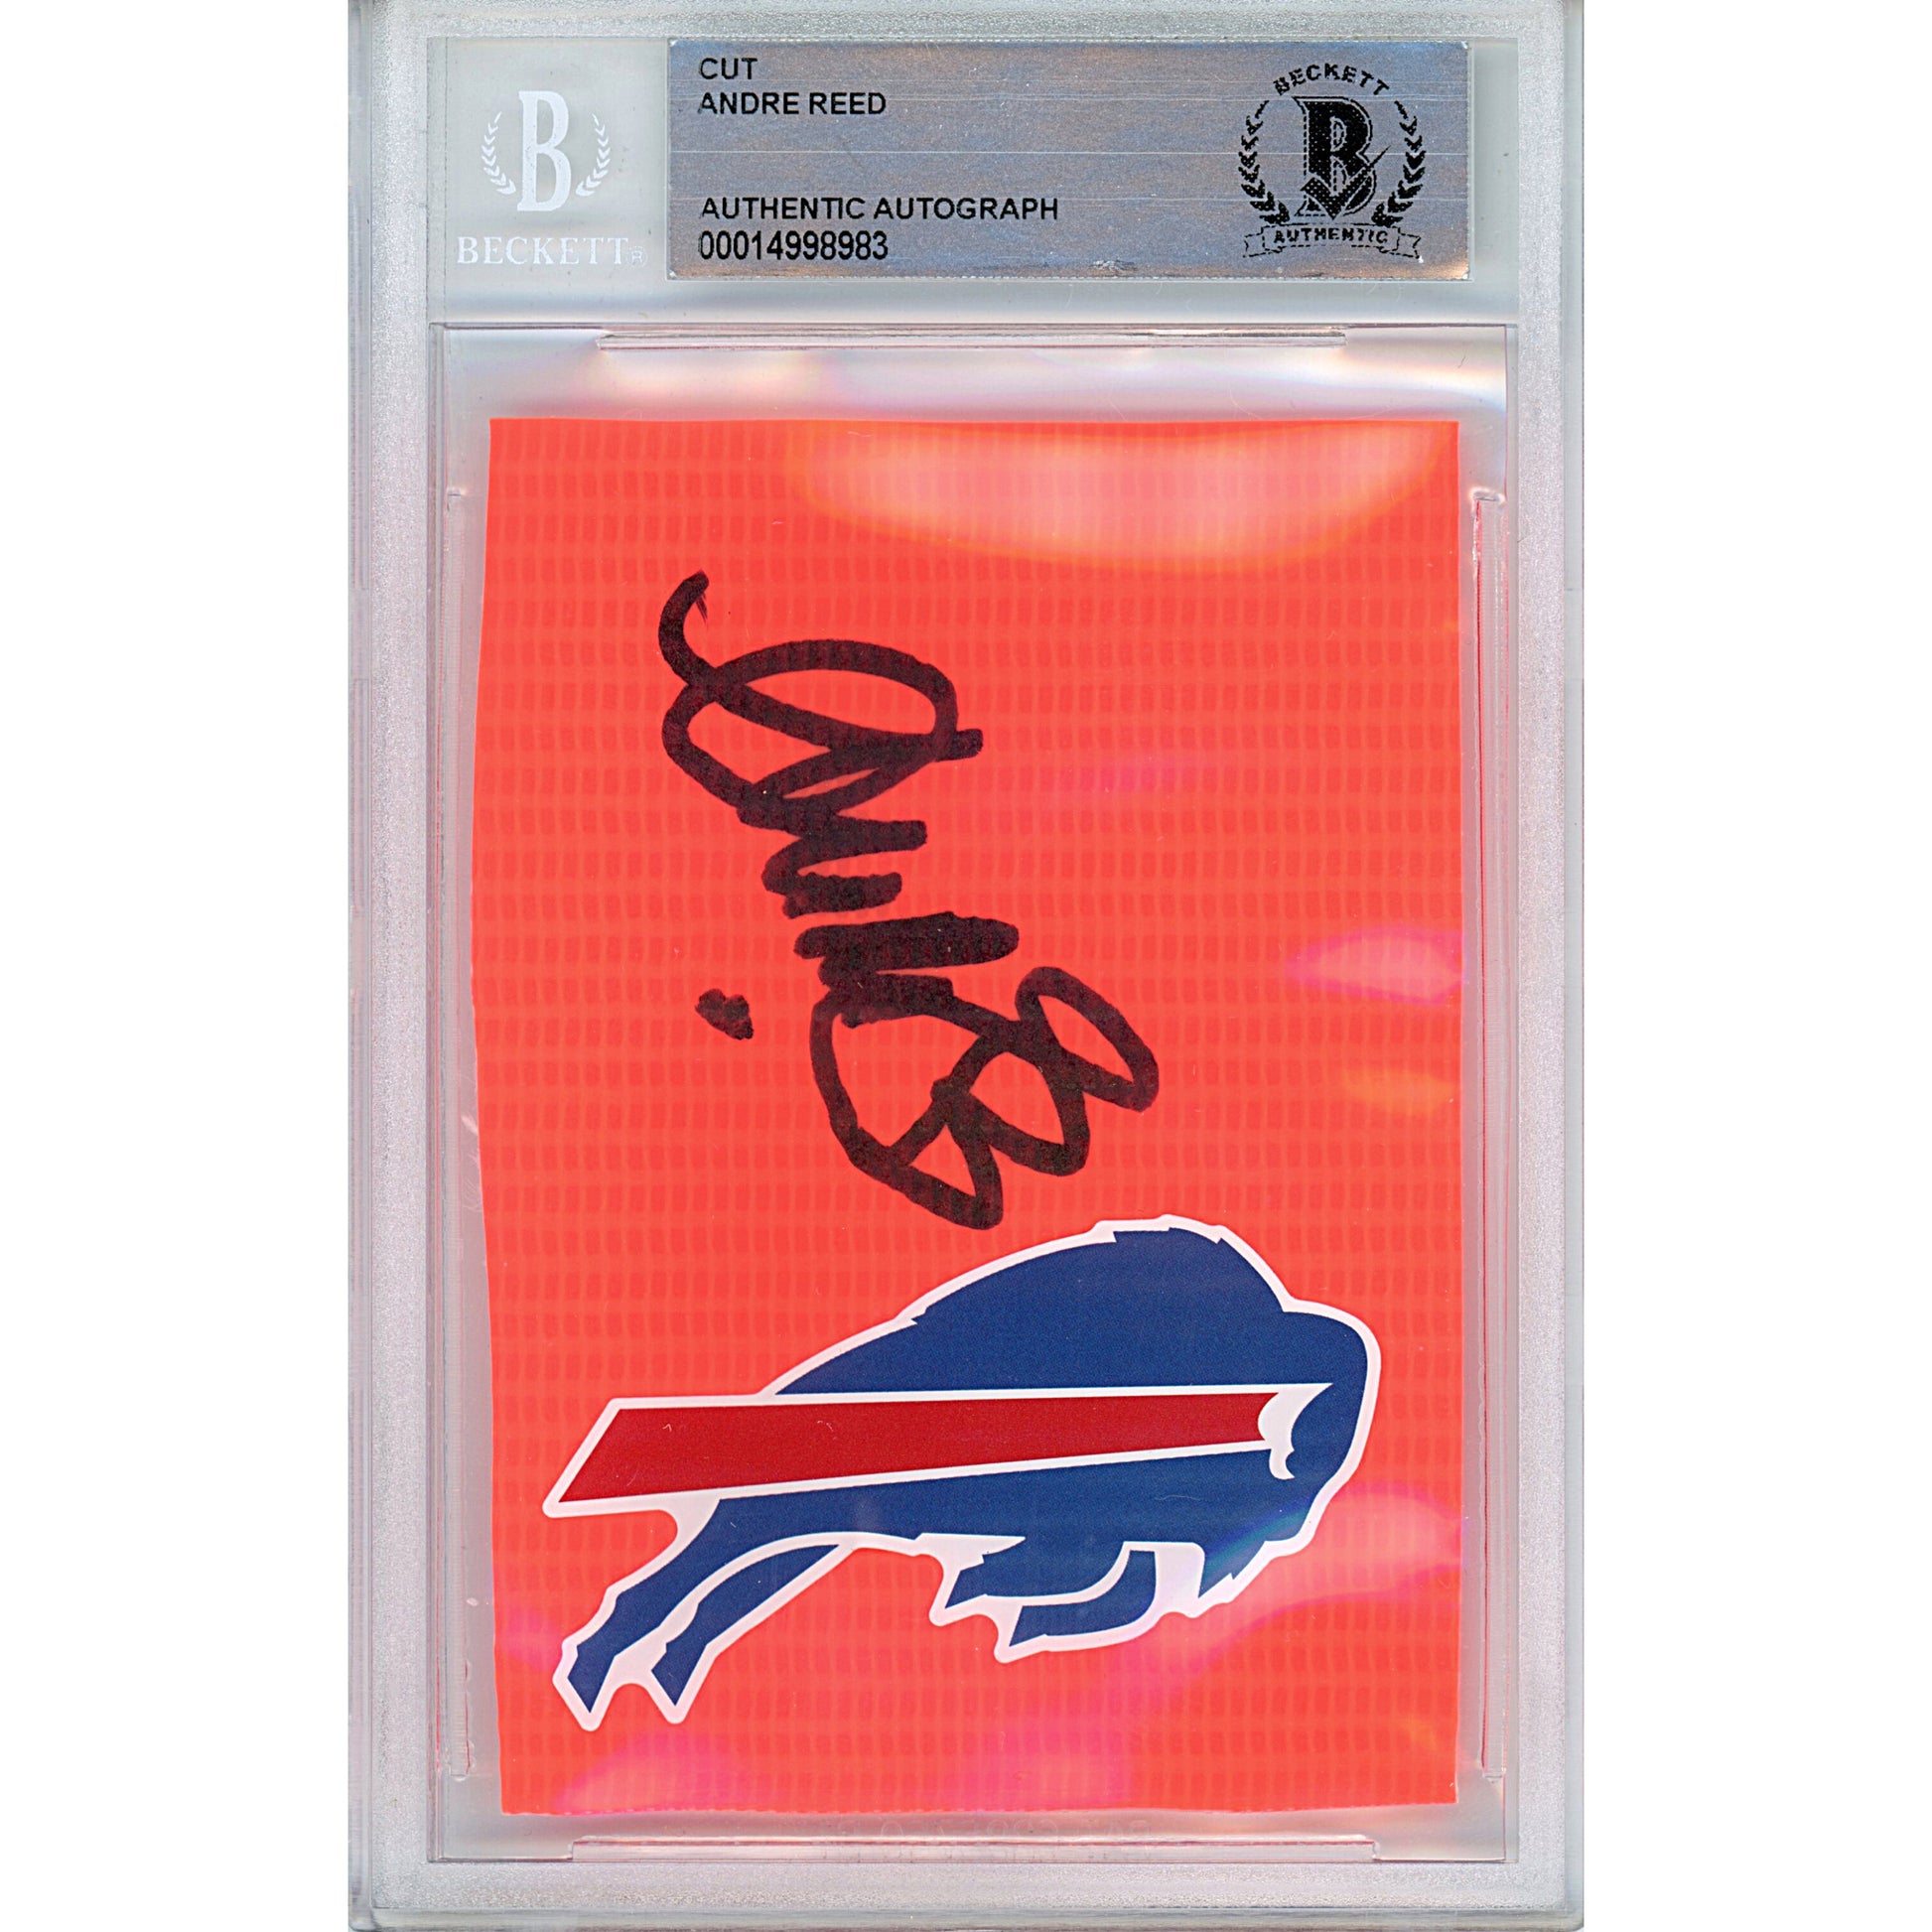 Football- Autographed- Andre Reed Signed Buffalo Bills End Zone Pylon Piece Beckett Authenticated Slabbed 00014998983 - 101